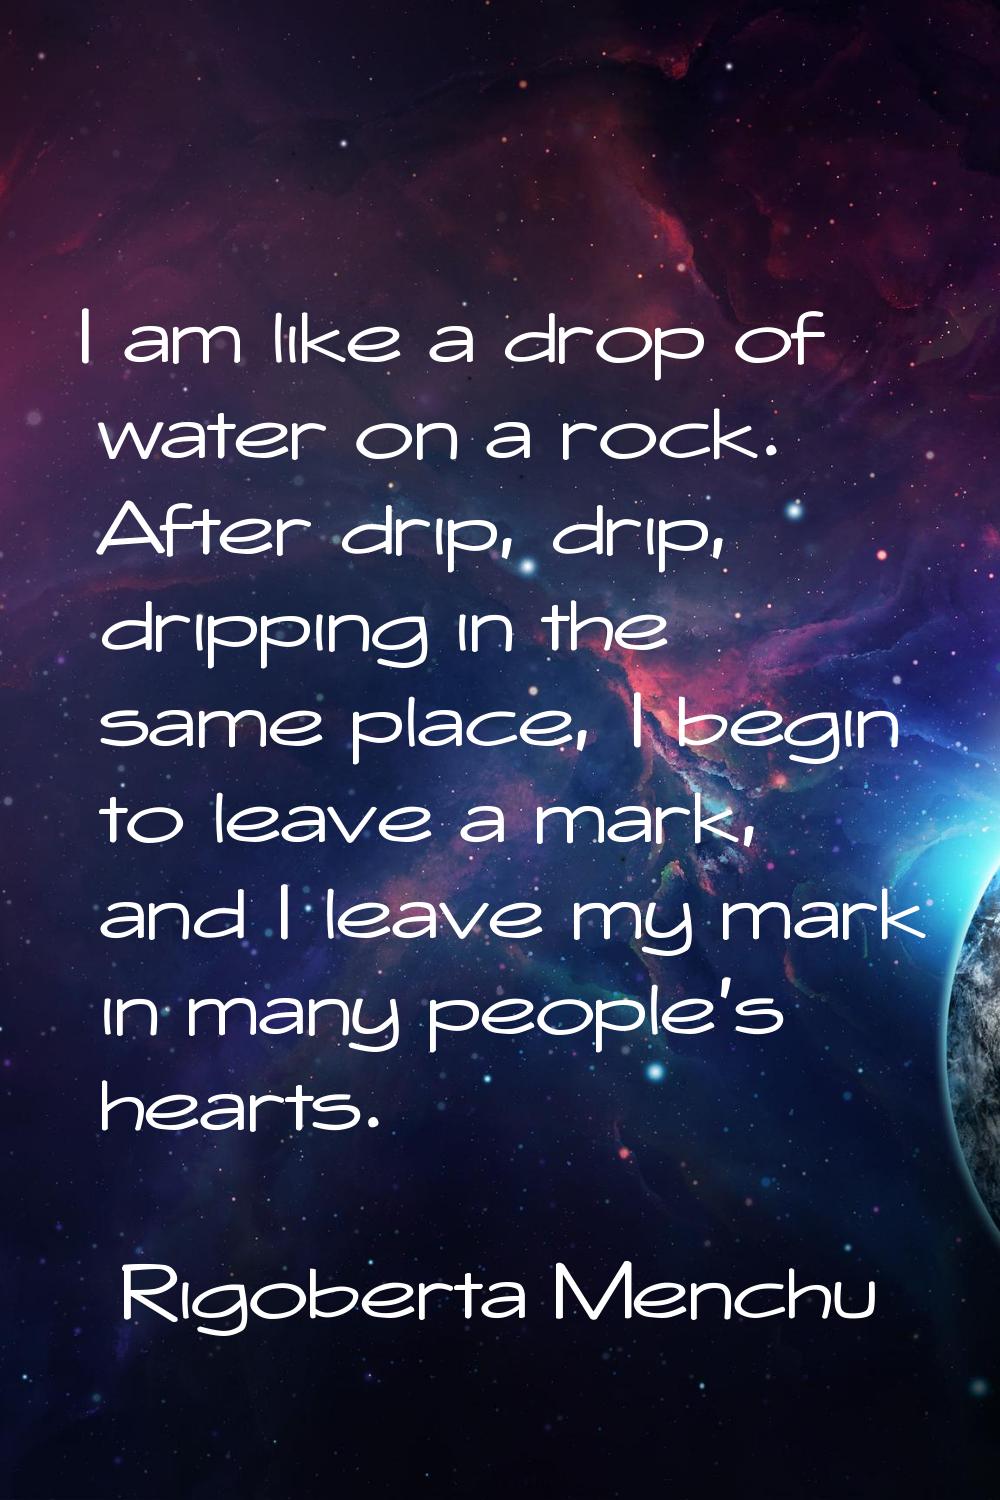 I am like a drop of water on a rock. After drip, drip, dripping in the same place, I begin to leave